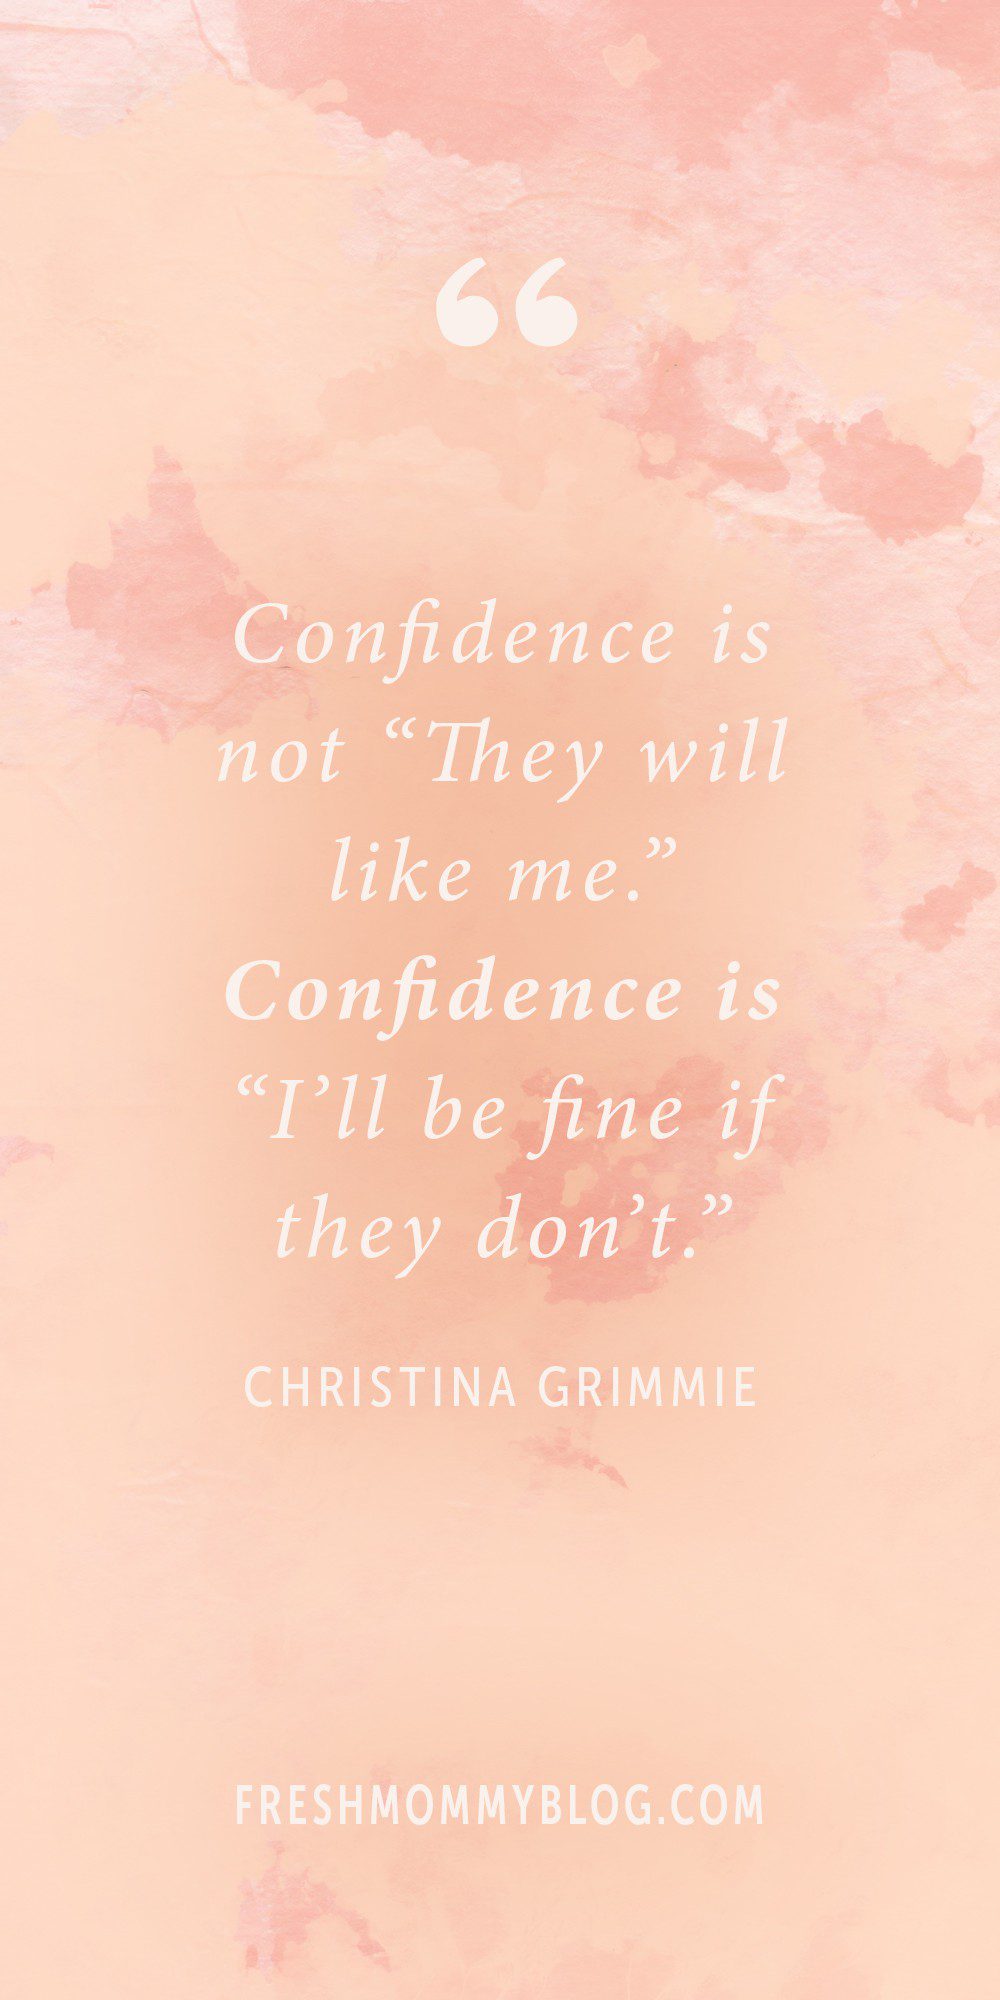 “Confidence is not  “They will like me.” Confidence is “ I’ll be fine if they don’t”” Christina Grimmie - Inspiring quotes for a successful year and life! | 5 Things to Stop Doing in 2020 + Quotes to Inspire Your Year by popular Florida life and style blog: image of a quote by Christina Grimmie.